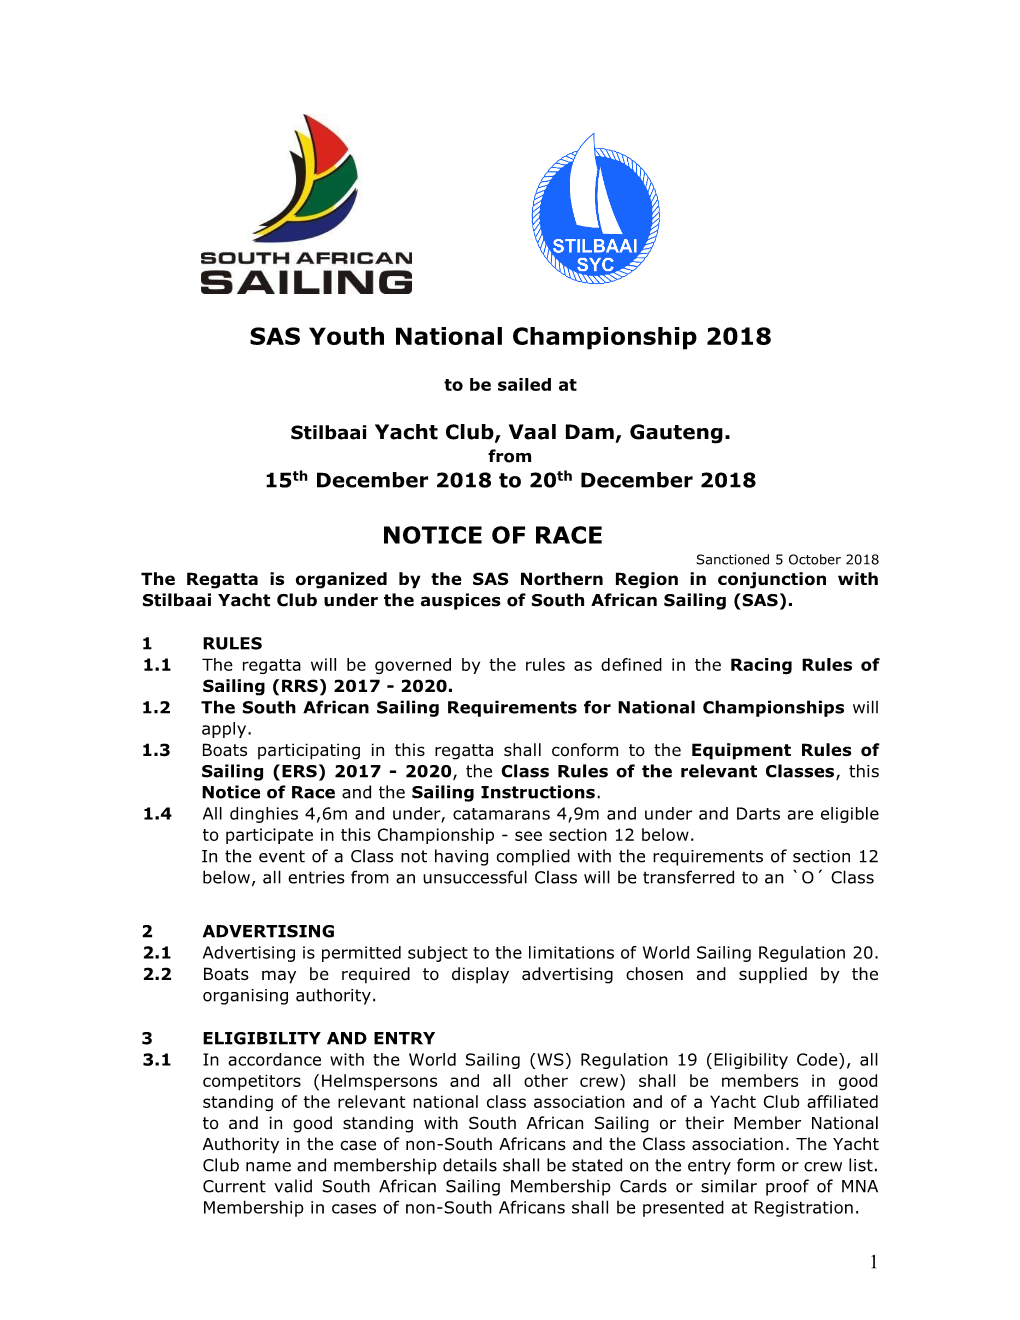 SAS Youth National Championship 2018 NOTICE of RACE